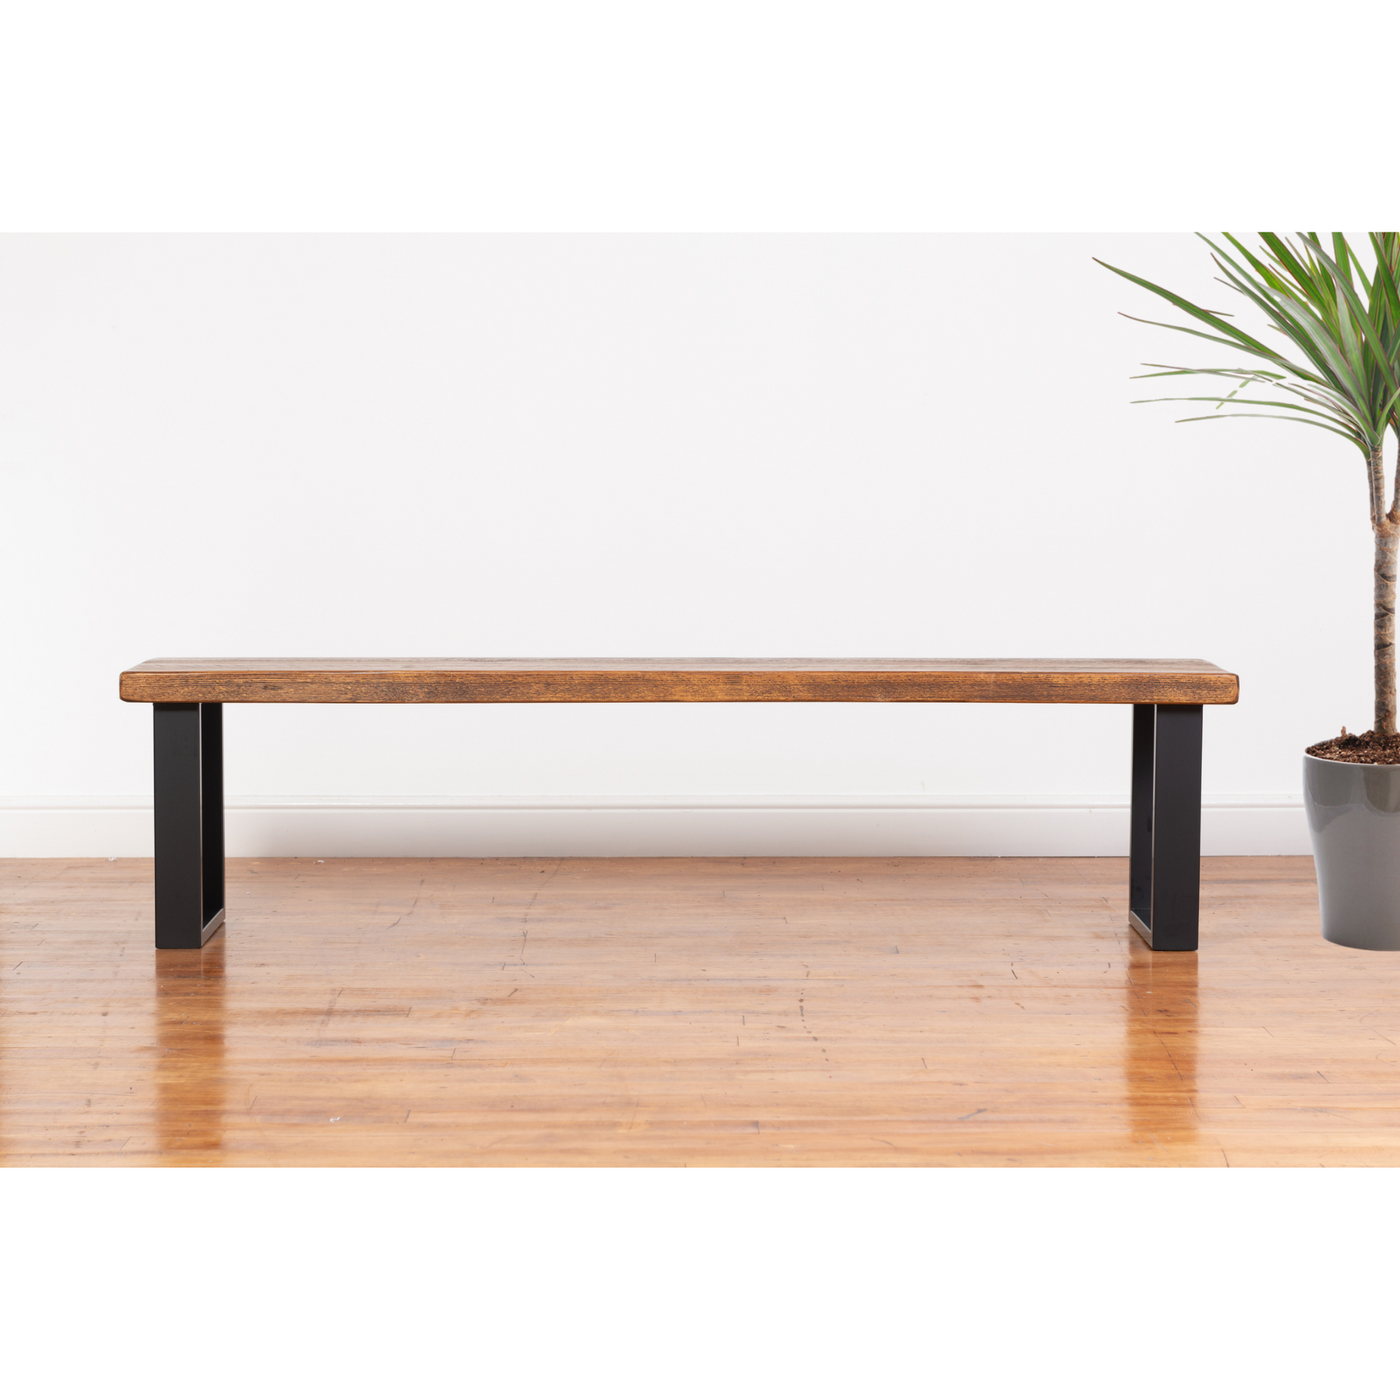 Helvellyn Industrial Bench - Square Legs